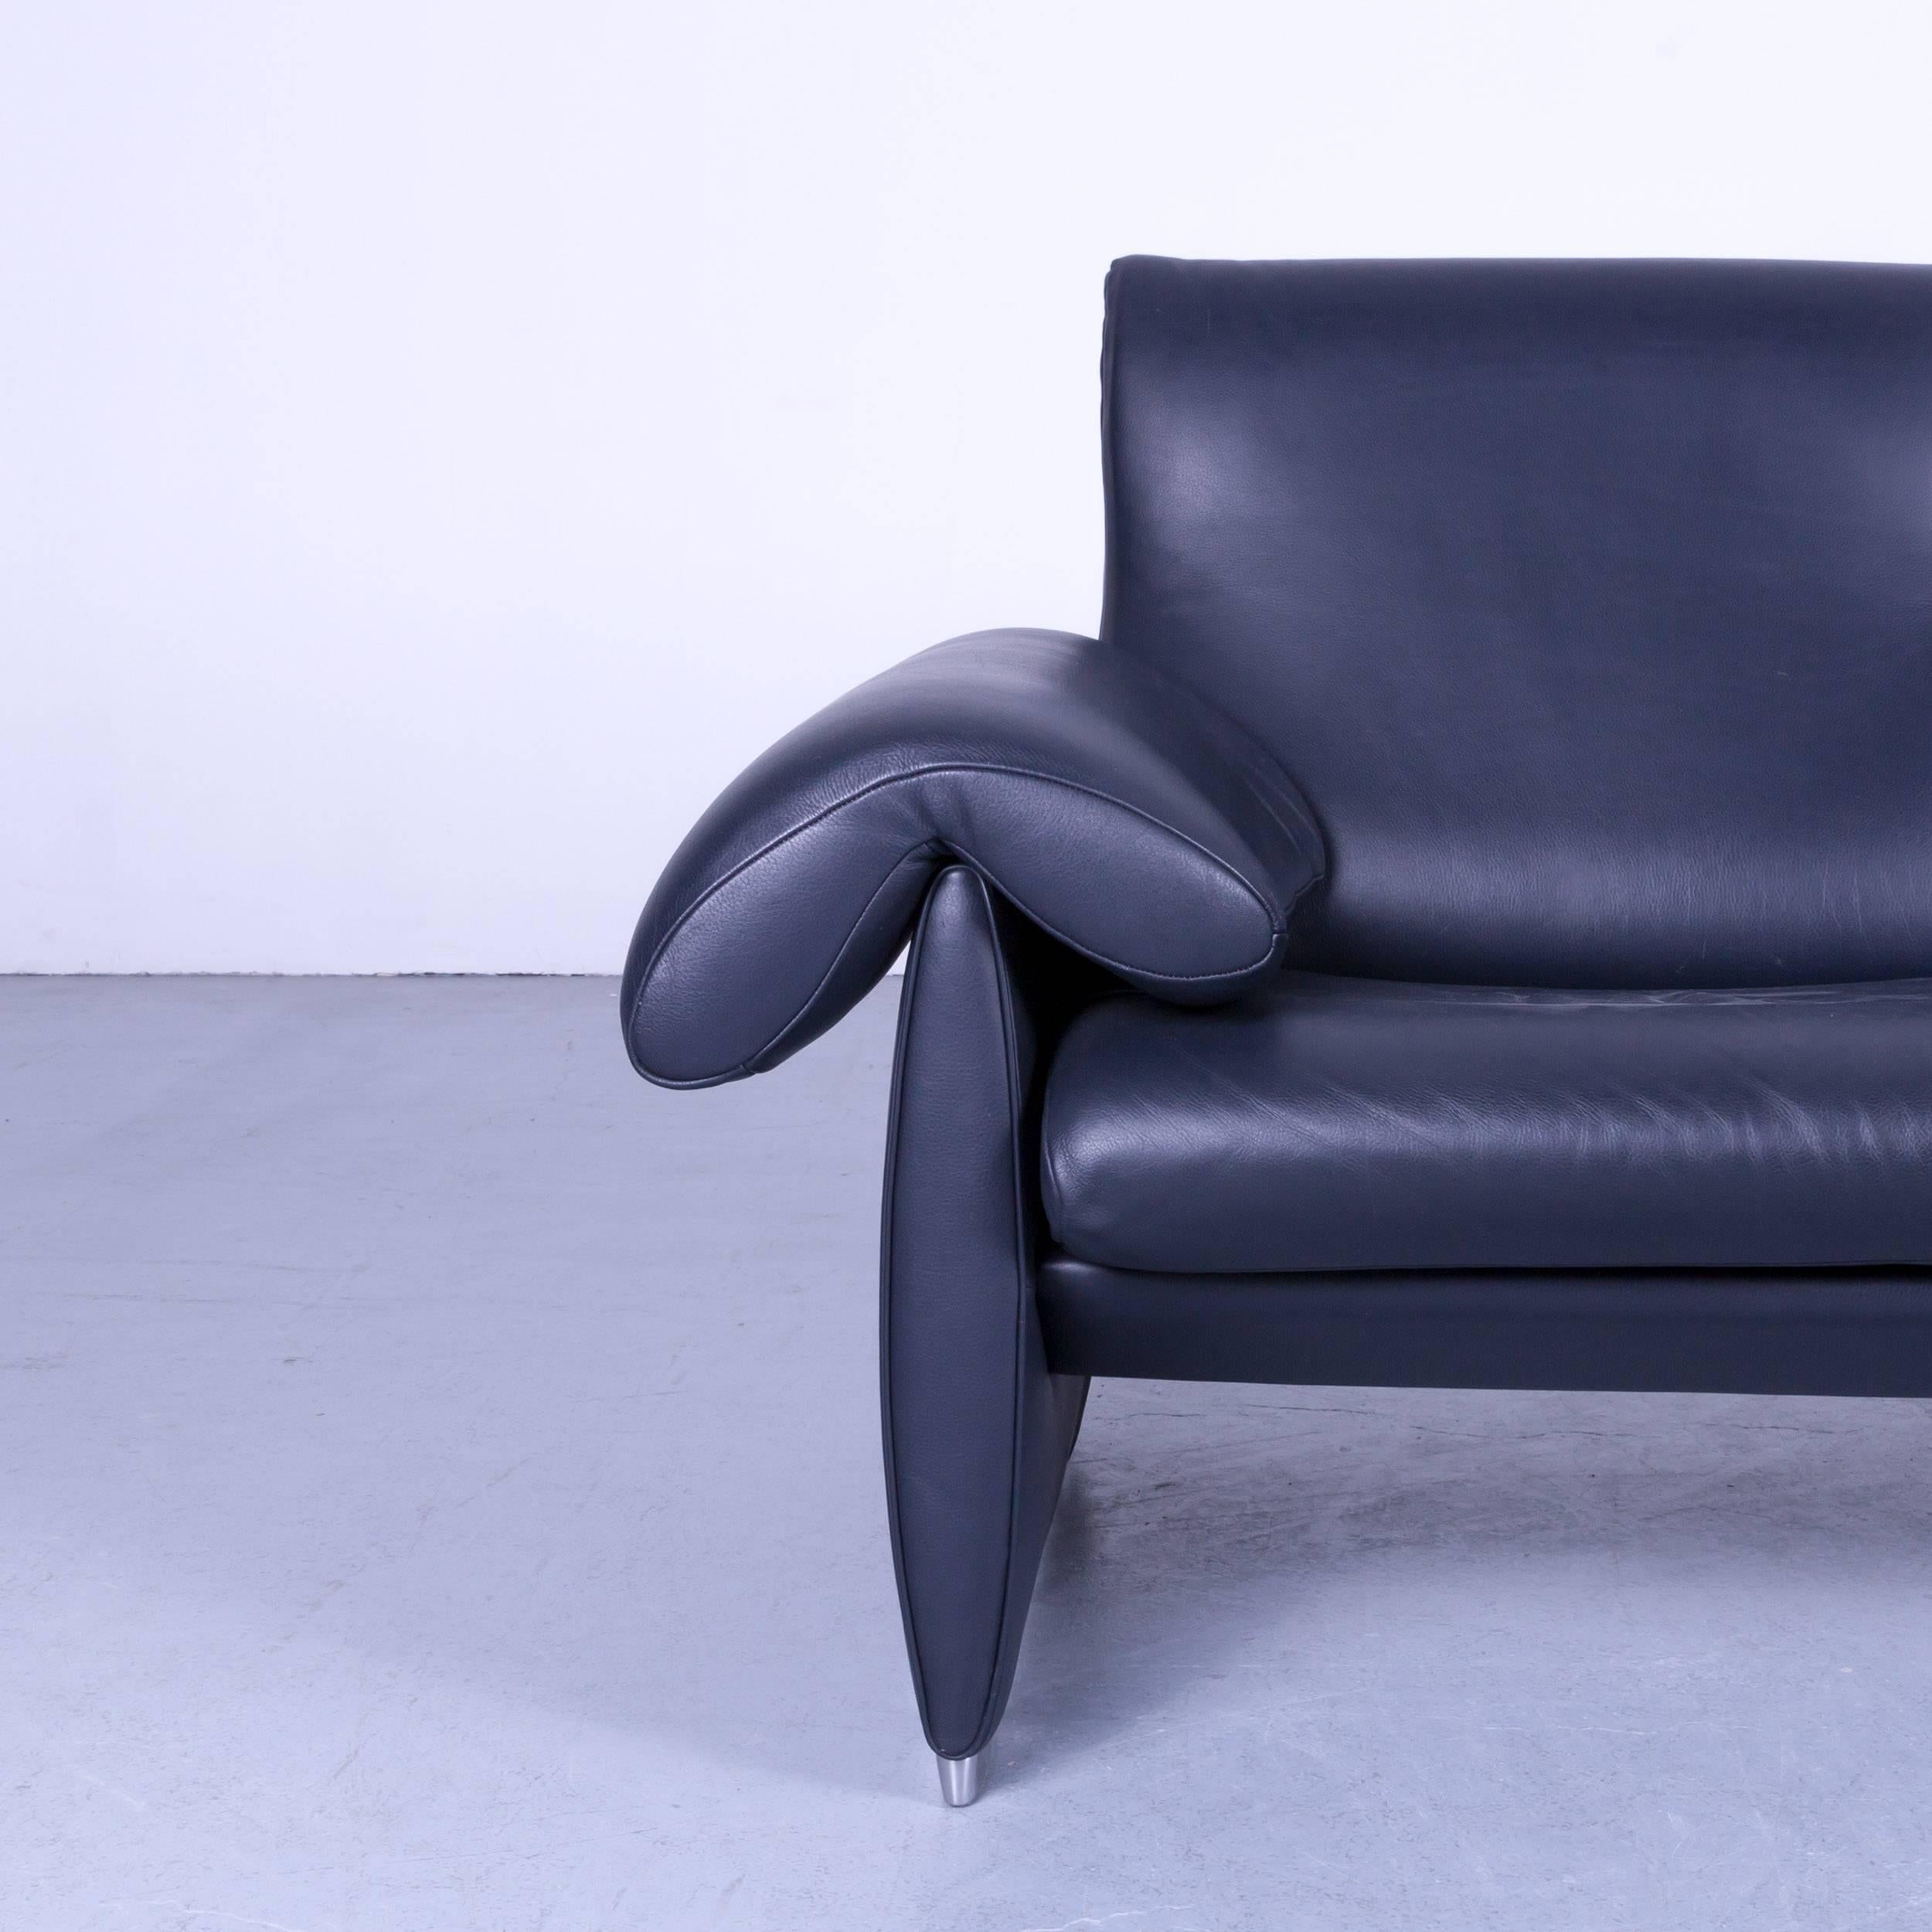 De Sede DS 10 designer sofa navy blue leather two-seat couch Switzerland, made for pure comfort.